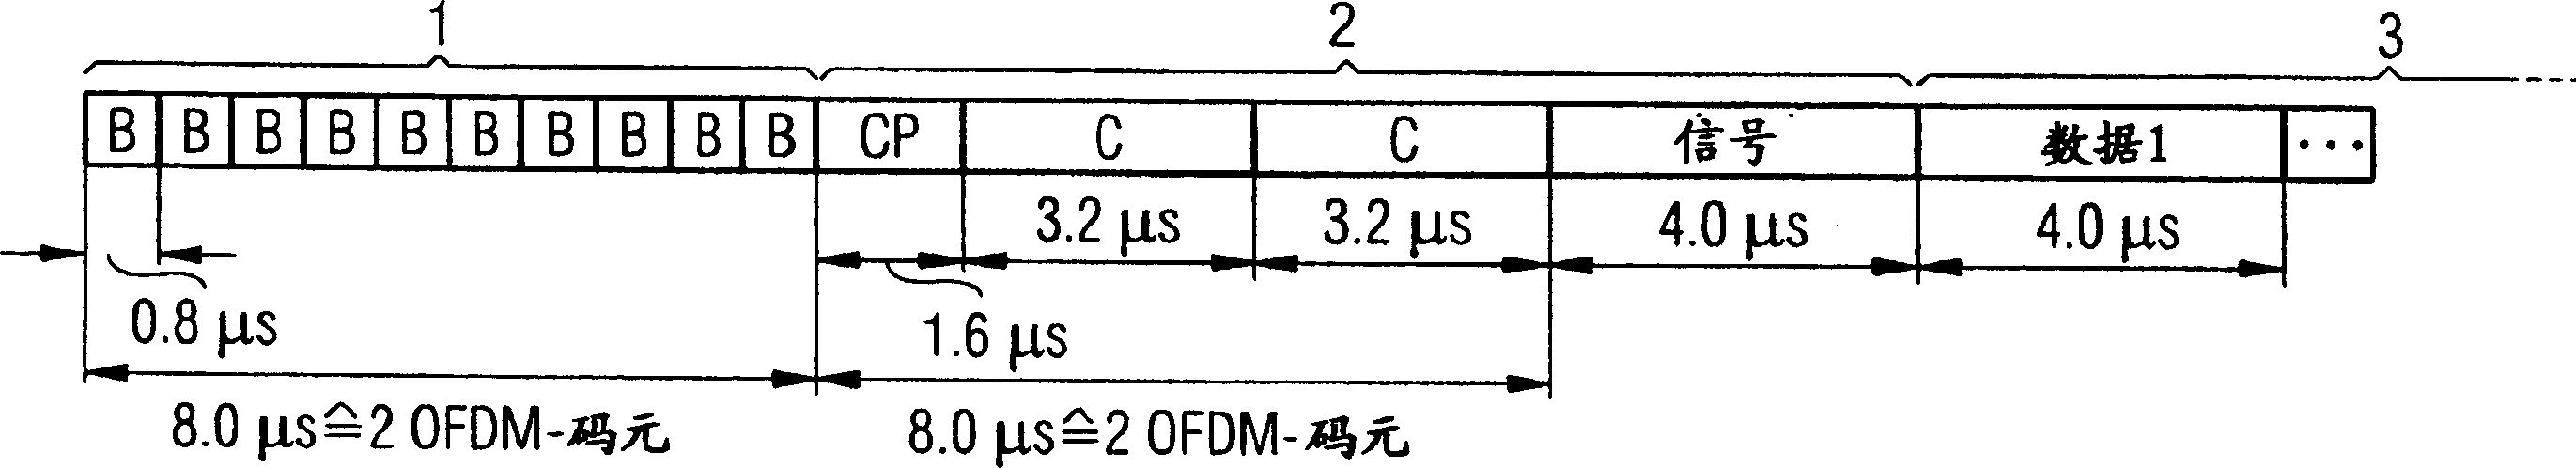 OFDM transmission method, which is intended both for sporadic and for continuous data communication, for a wlan